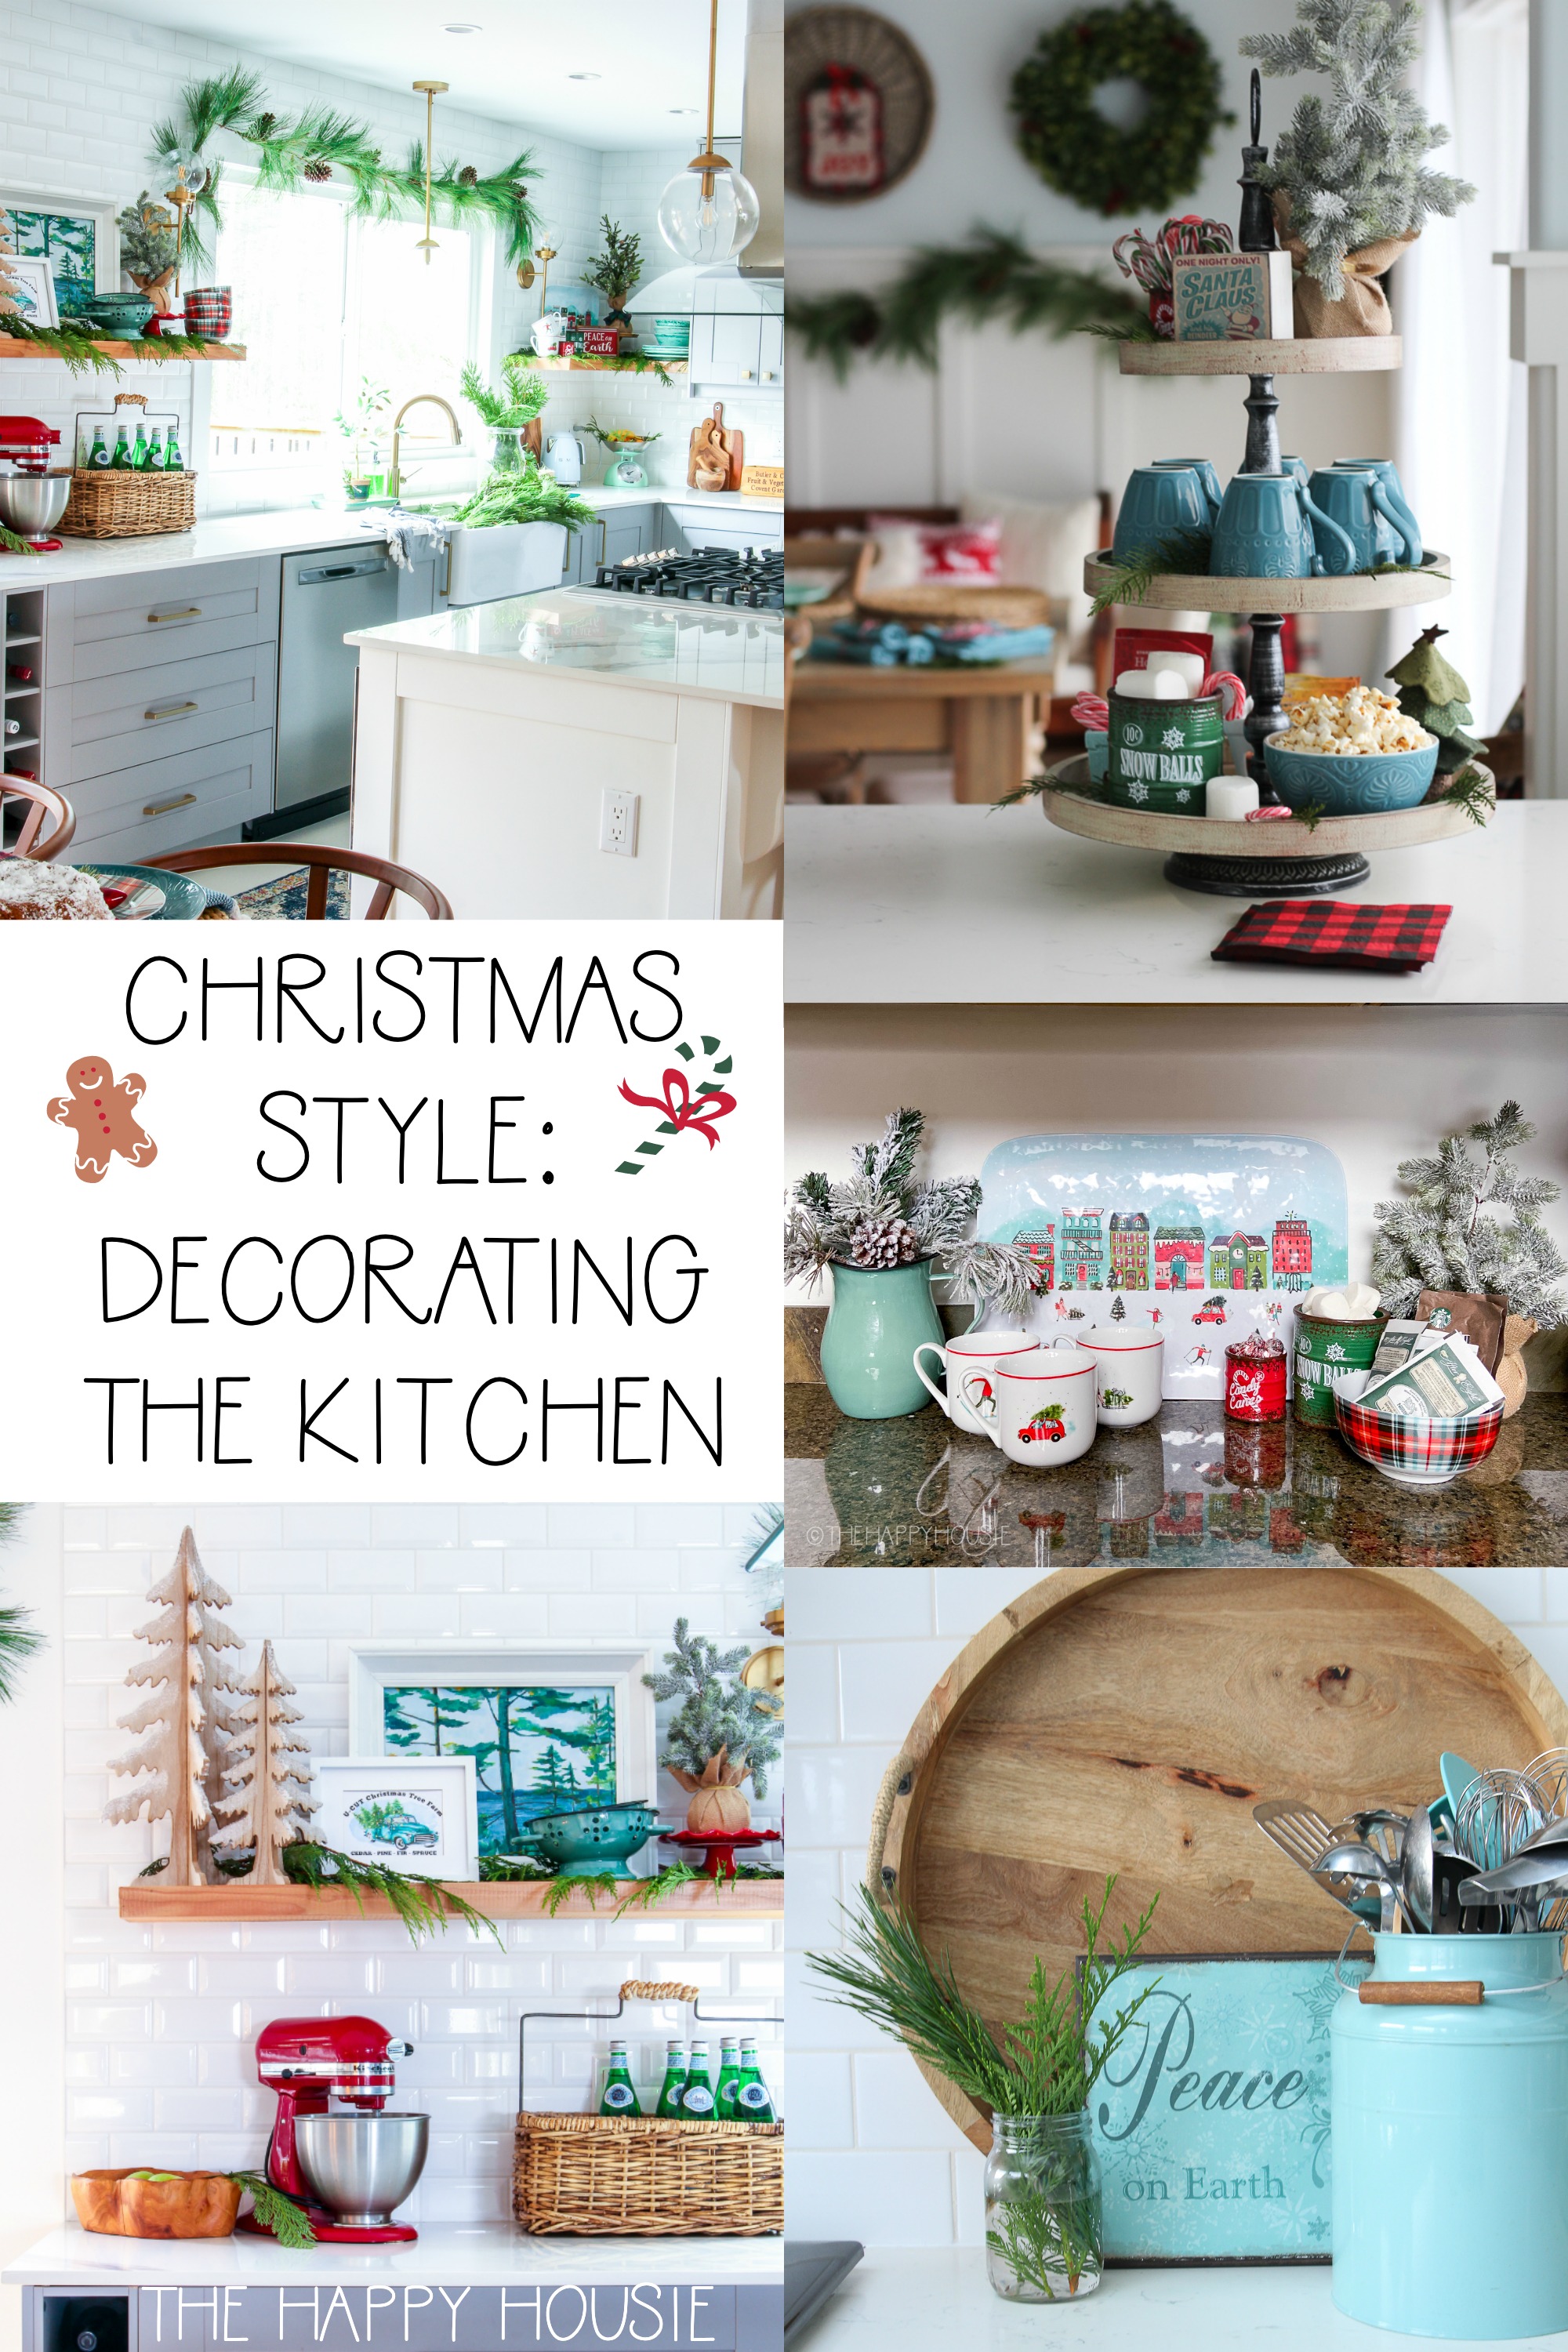 https://www.thehappyhousie.com/wp-content/uploads/2020/12/Christmas-Style-Ideas-for-Decorating-the-Kitchen-for-Christmas.jpg